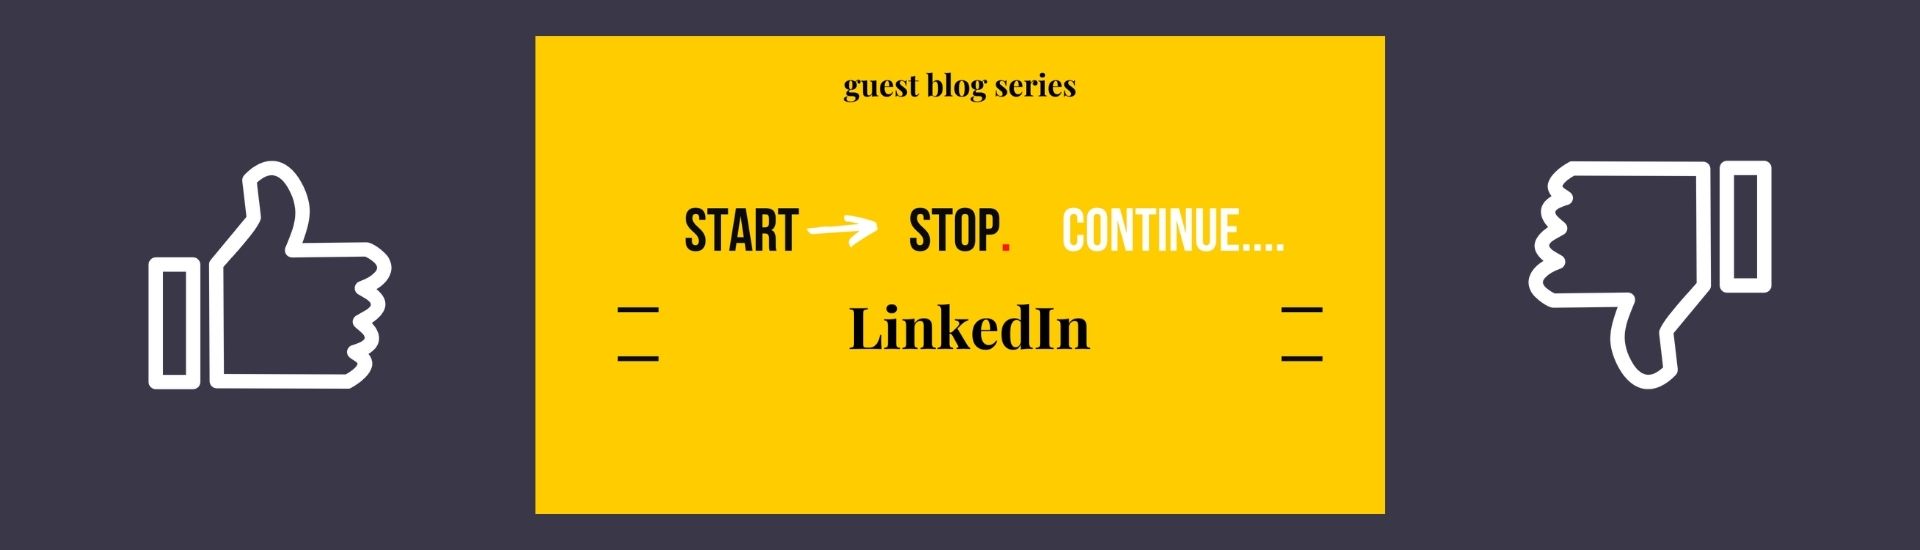 LinkedIn advice on what to start, stop and continue doing for your business